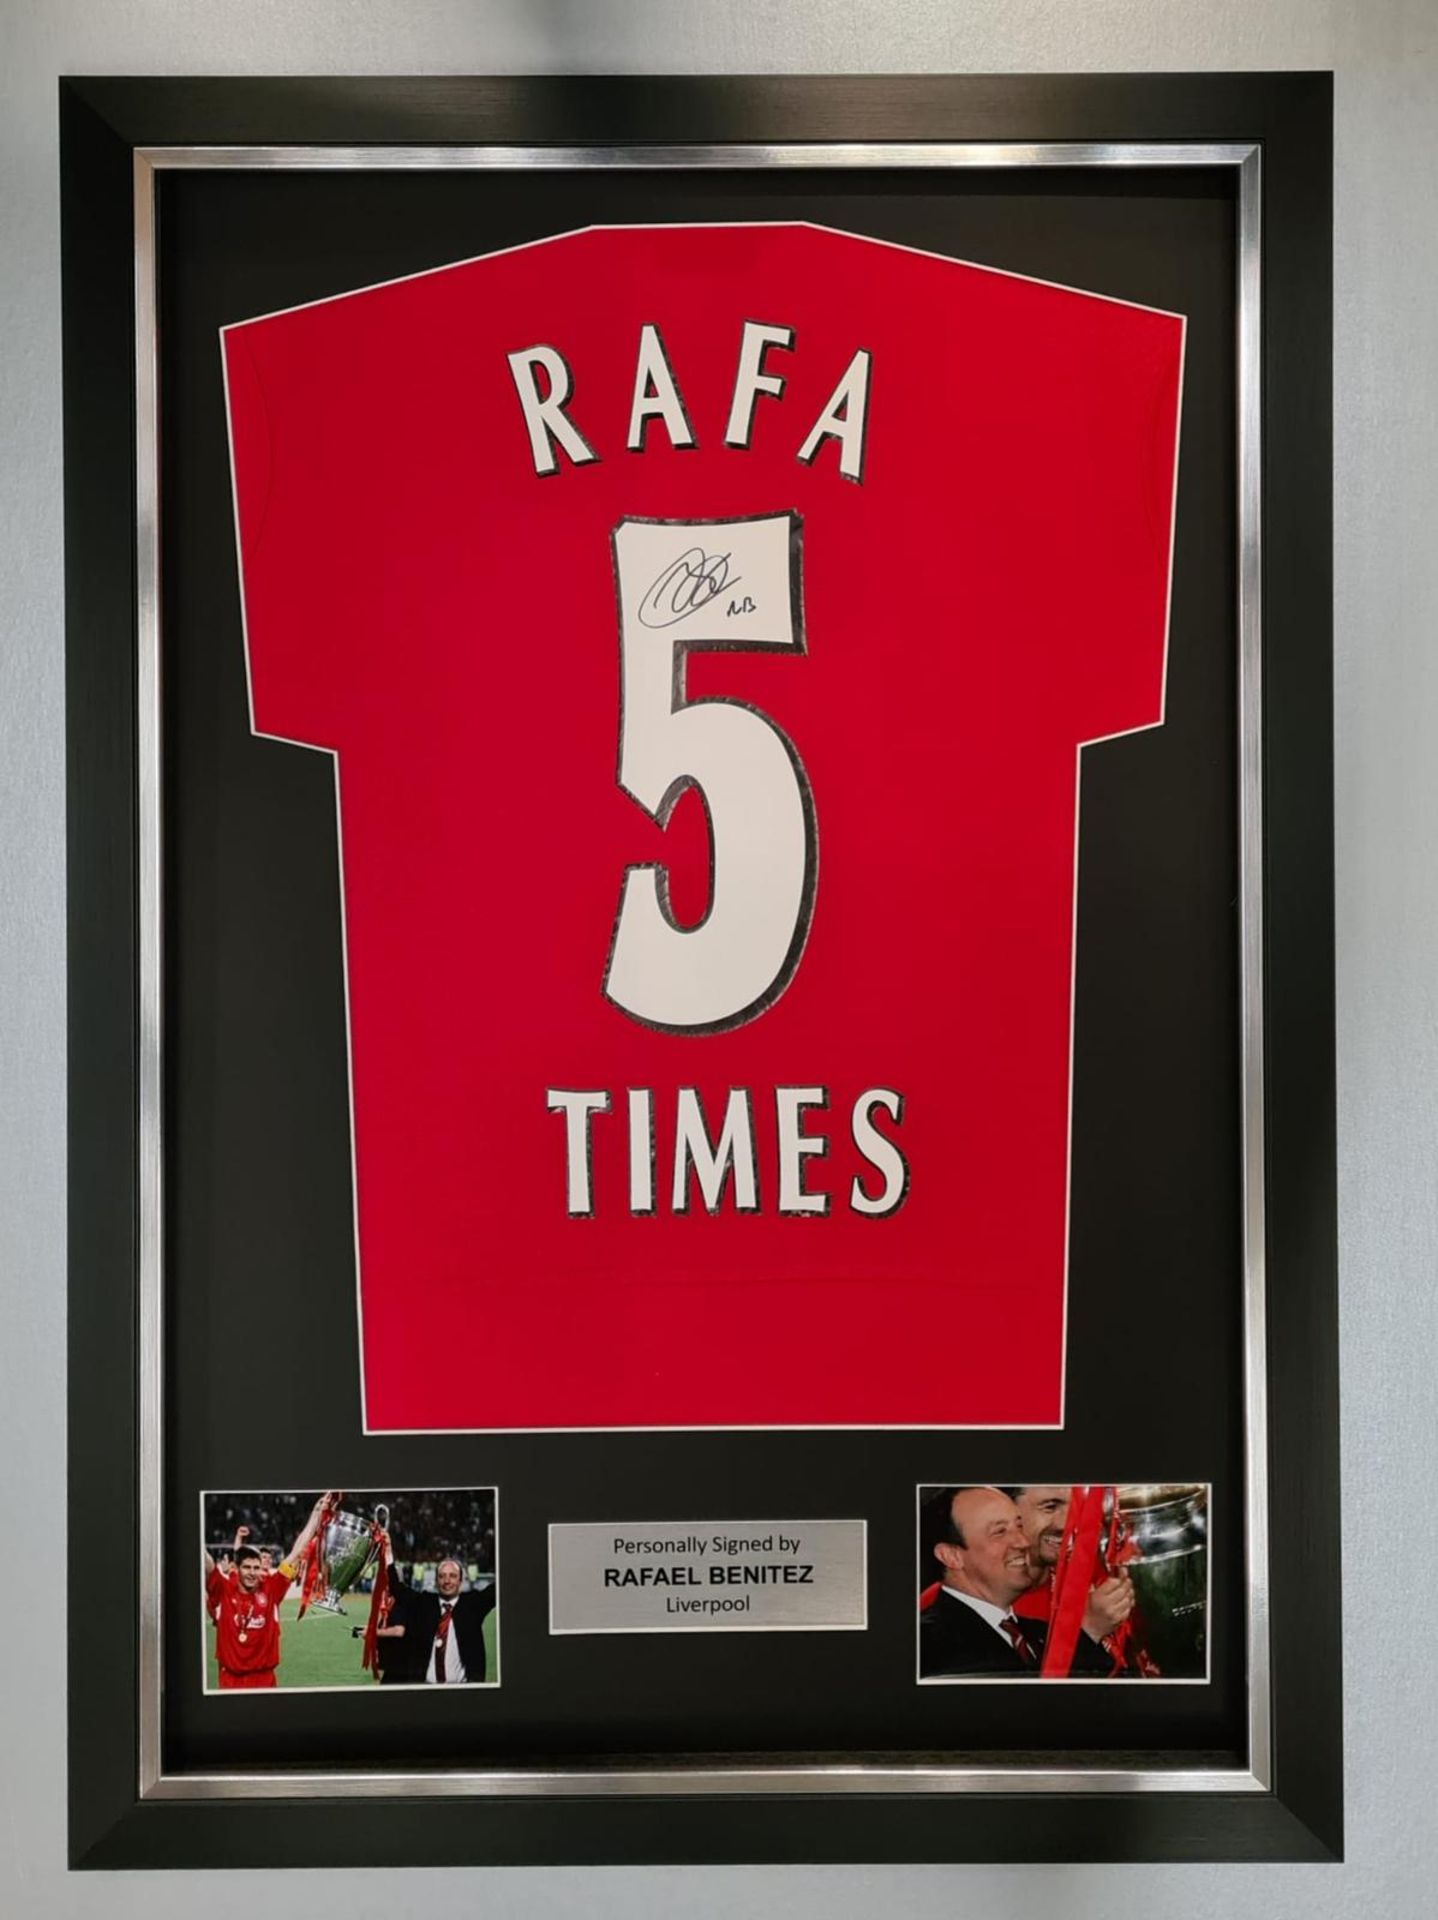 Rafa Benitez Signed And Framed Liverpool 2005 Shirt Supplied with Certificate Of Authenticity